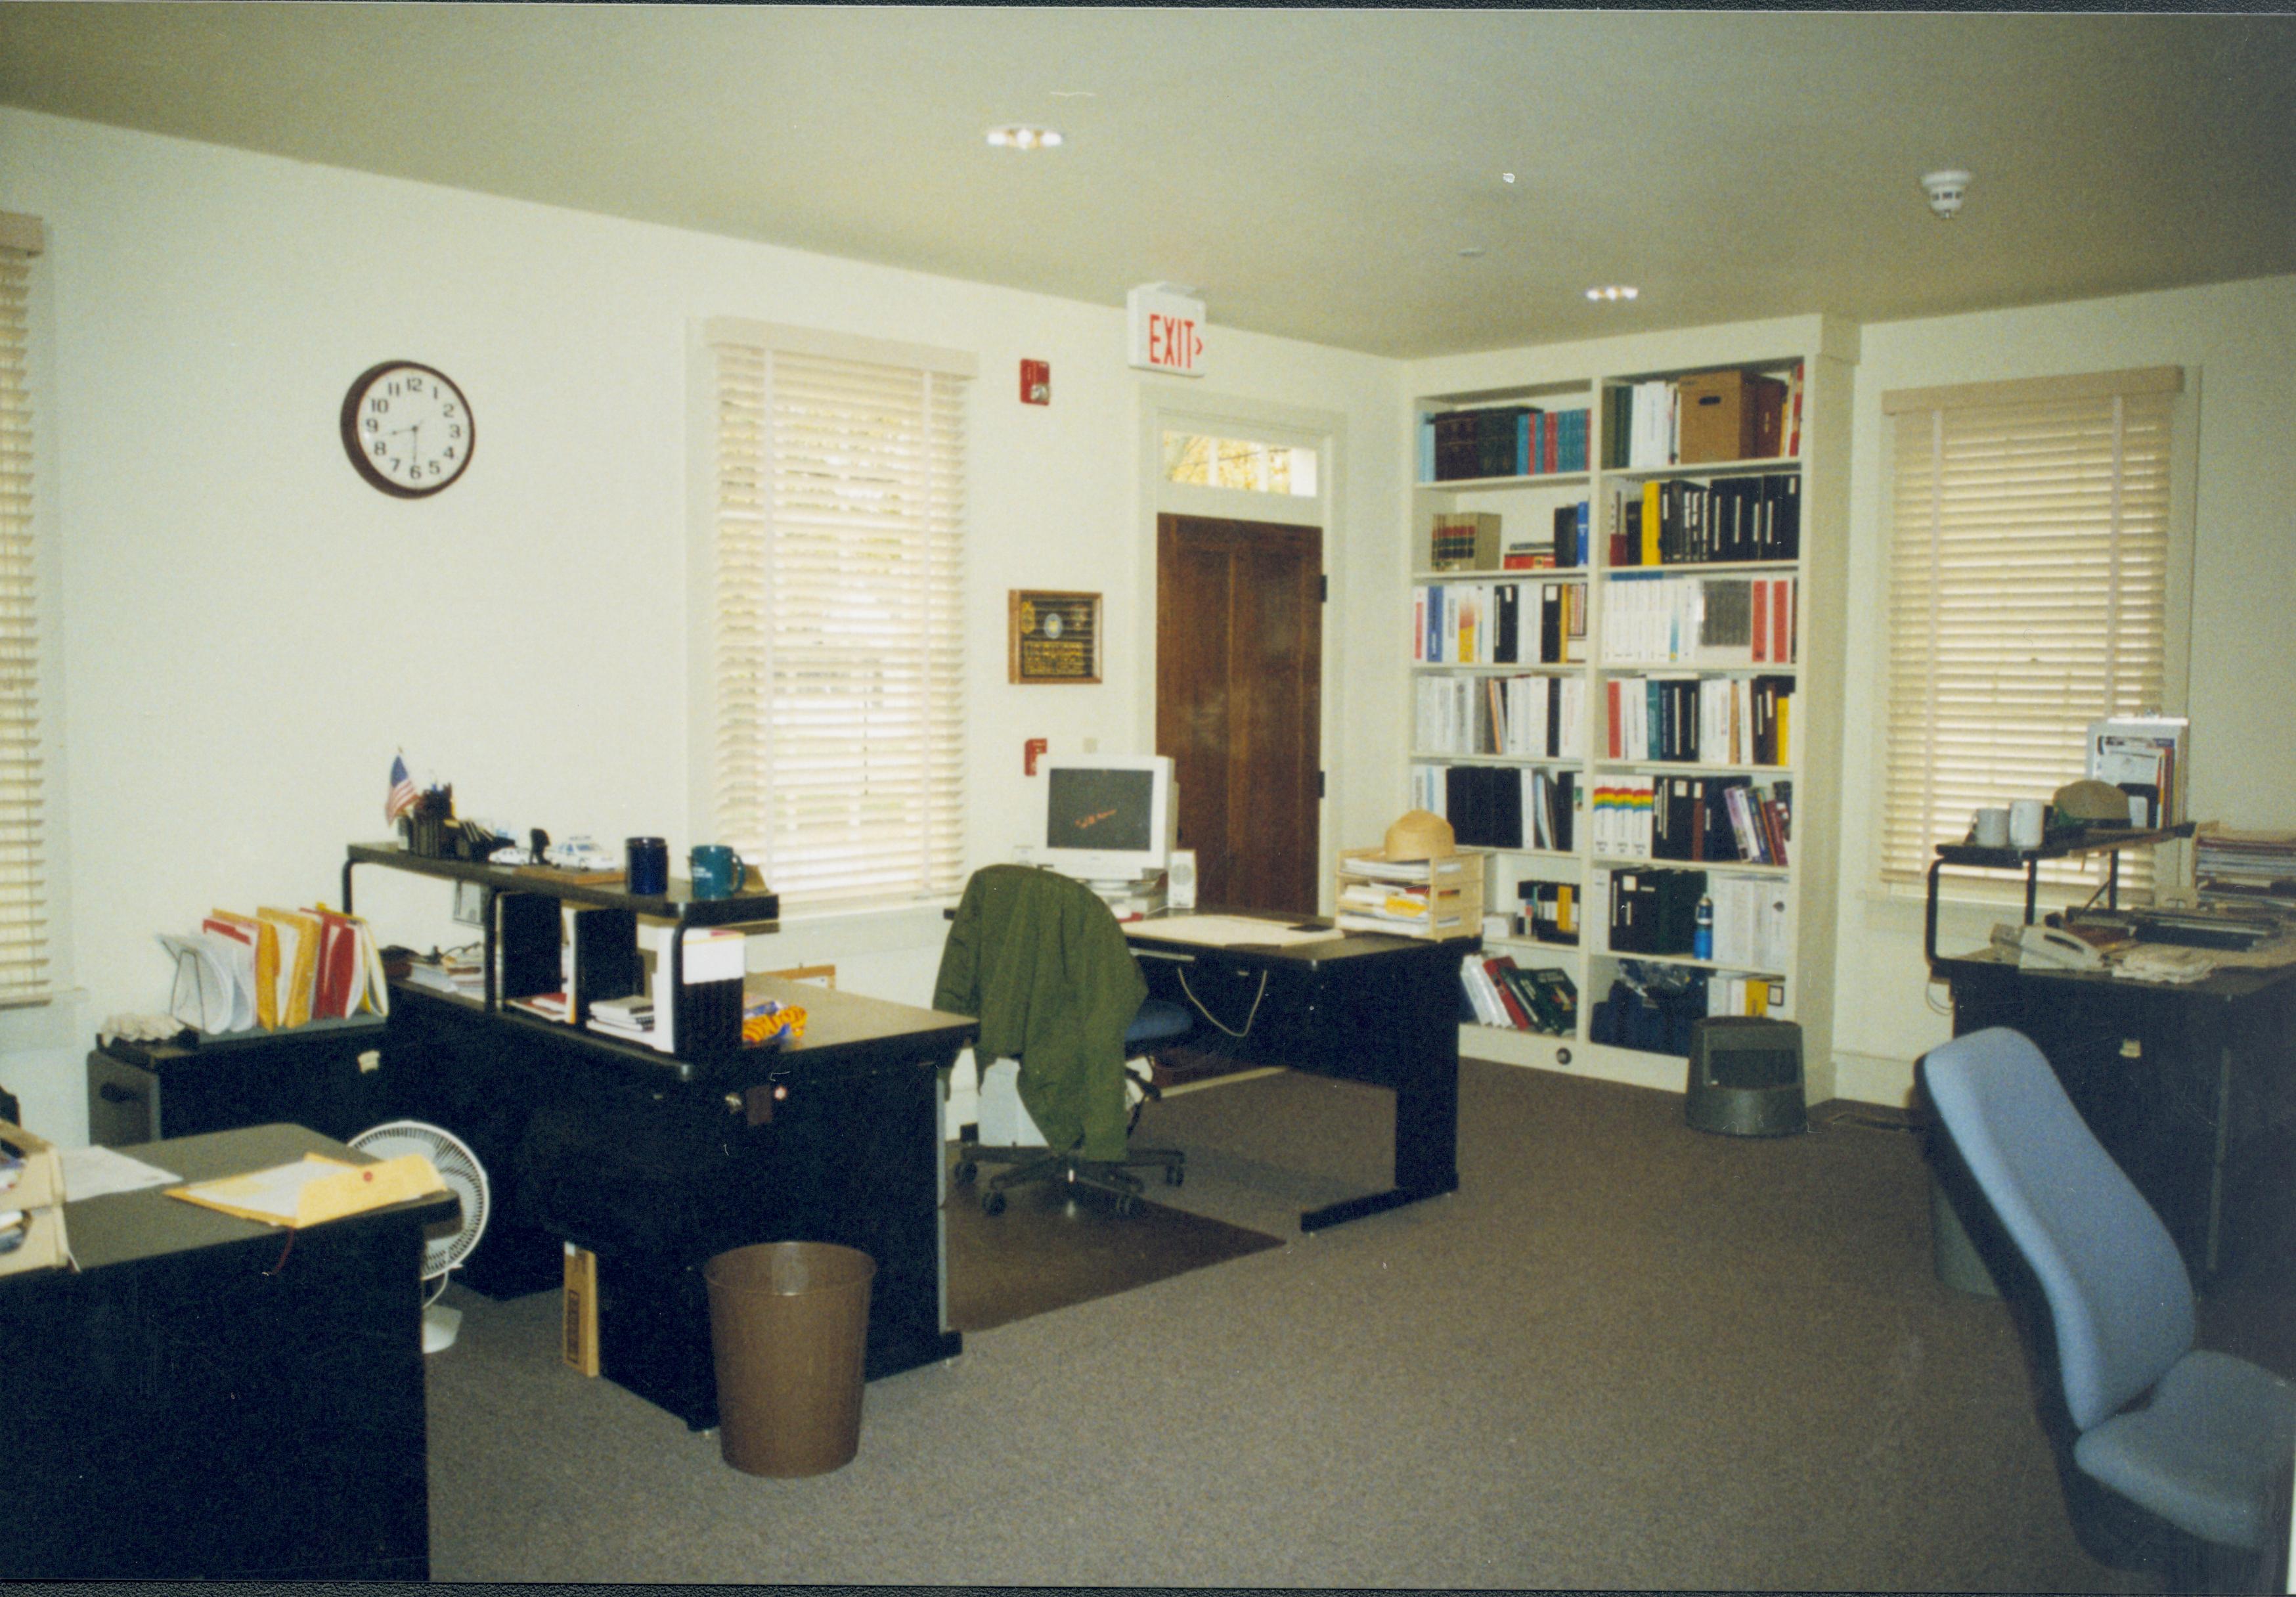 Sprigg House office Lincoln Home NHS- Sprigg House, Visitor Center Remodel, Roll 1998-12, exp 3 Sprigg House, office